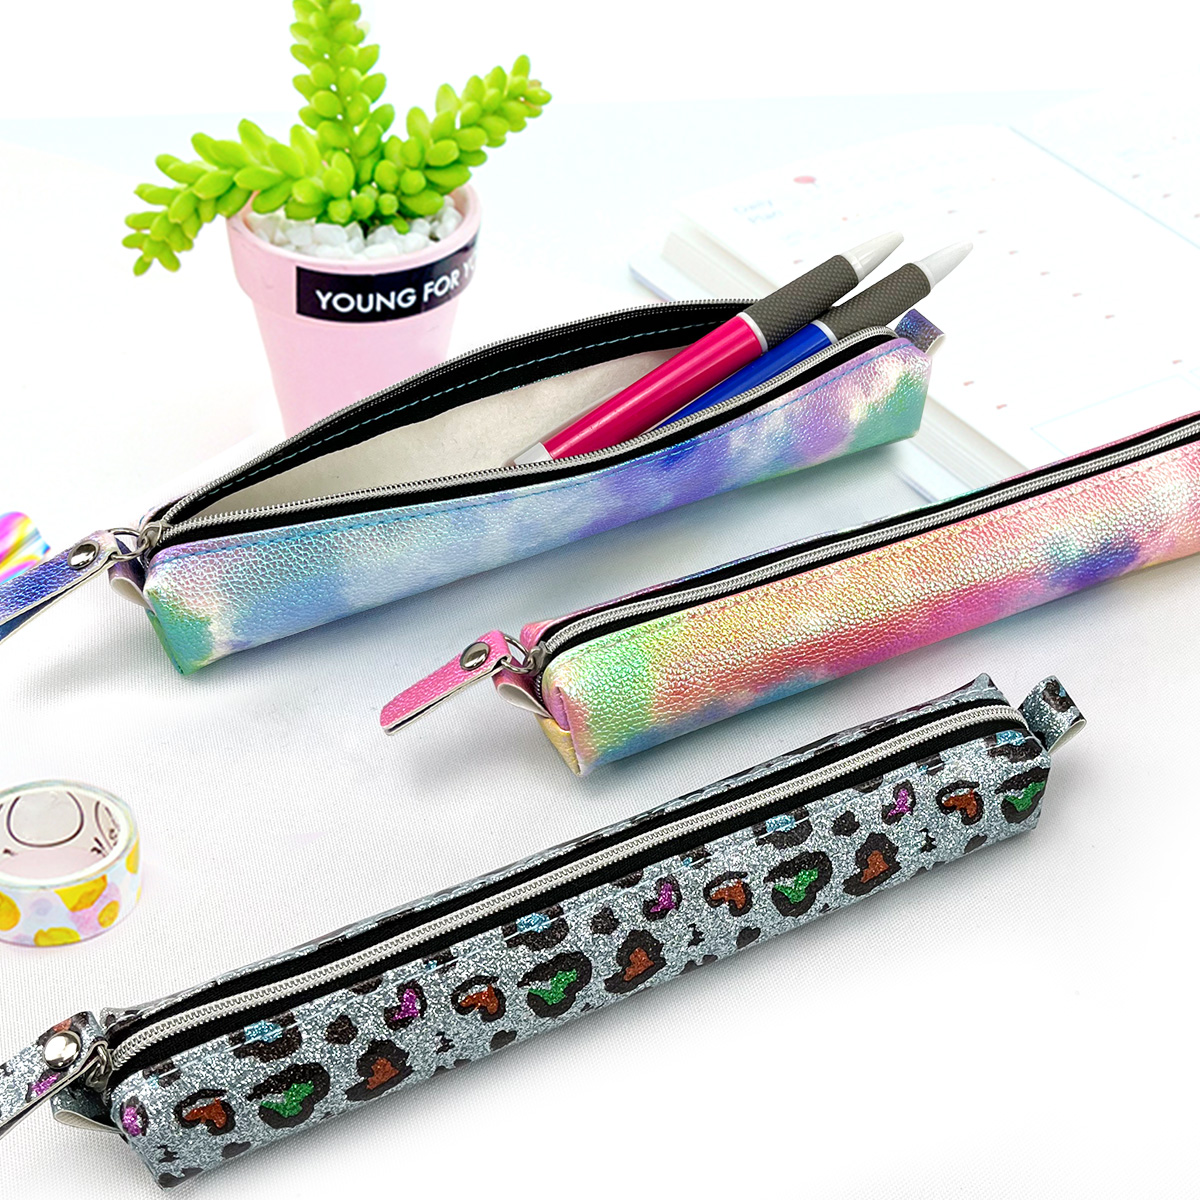 Colorful iridescent Wholesale ODM China hot selling pencil pouch pen case with zipper closure great gift for business office school supplies China OEM factory